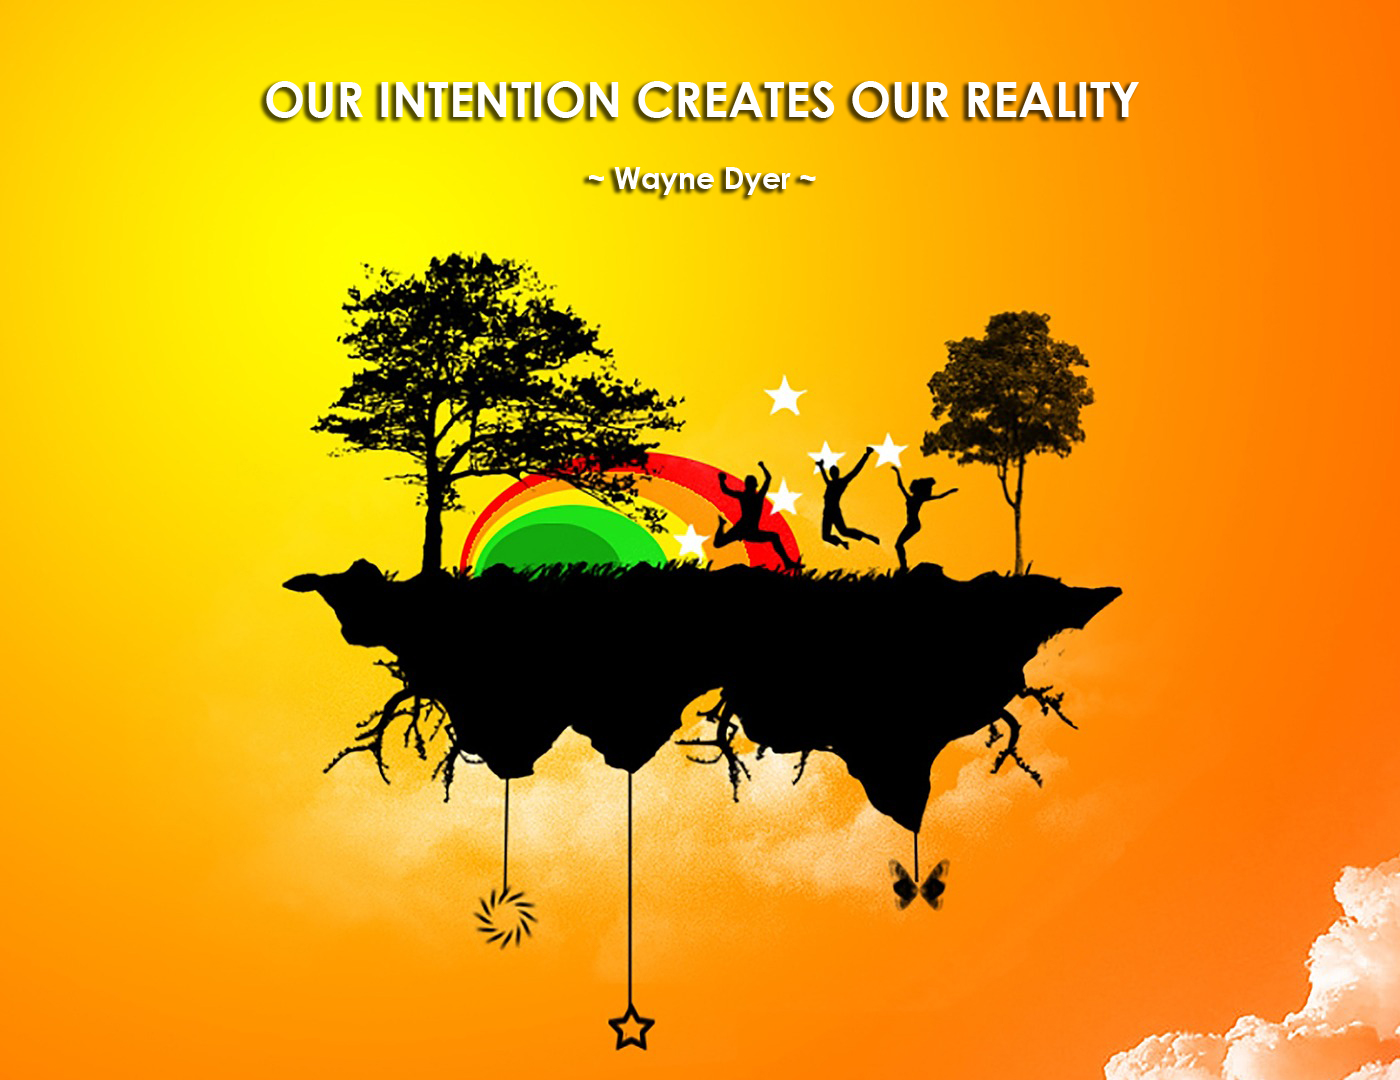 "Our Intention Creates Our Reality" - Wayne-Dyer